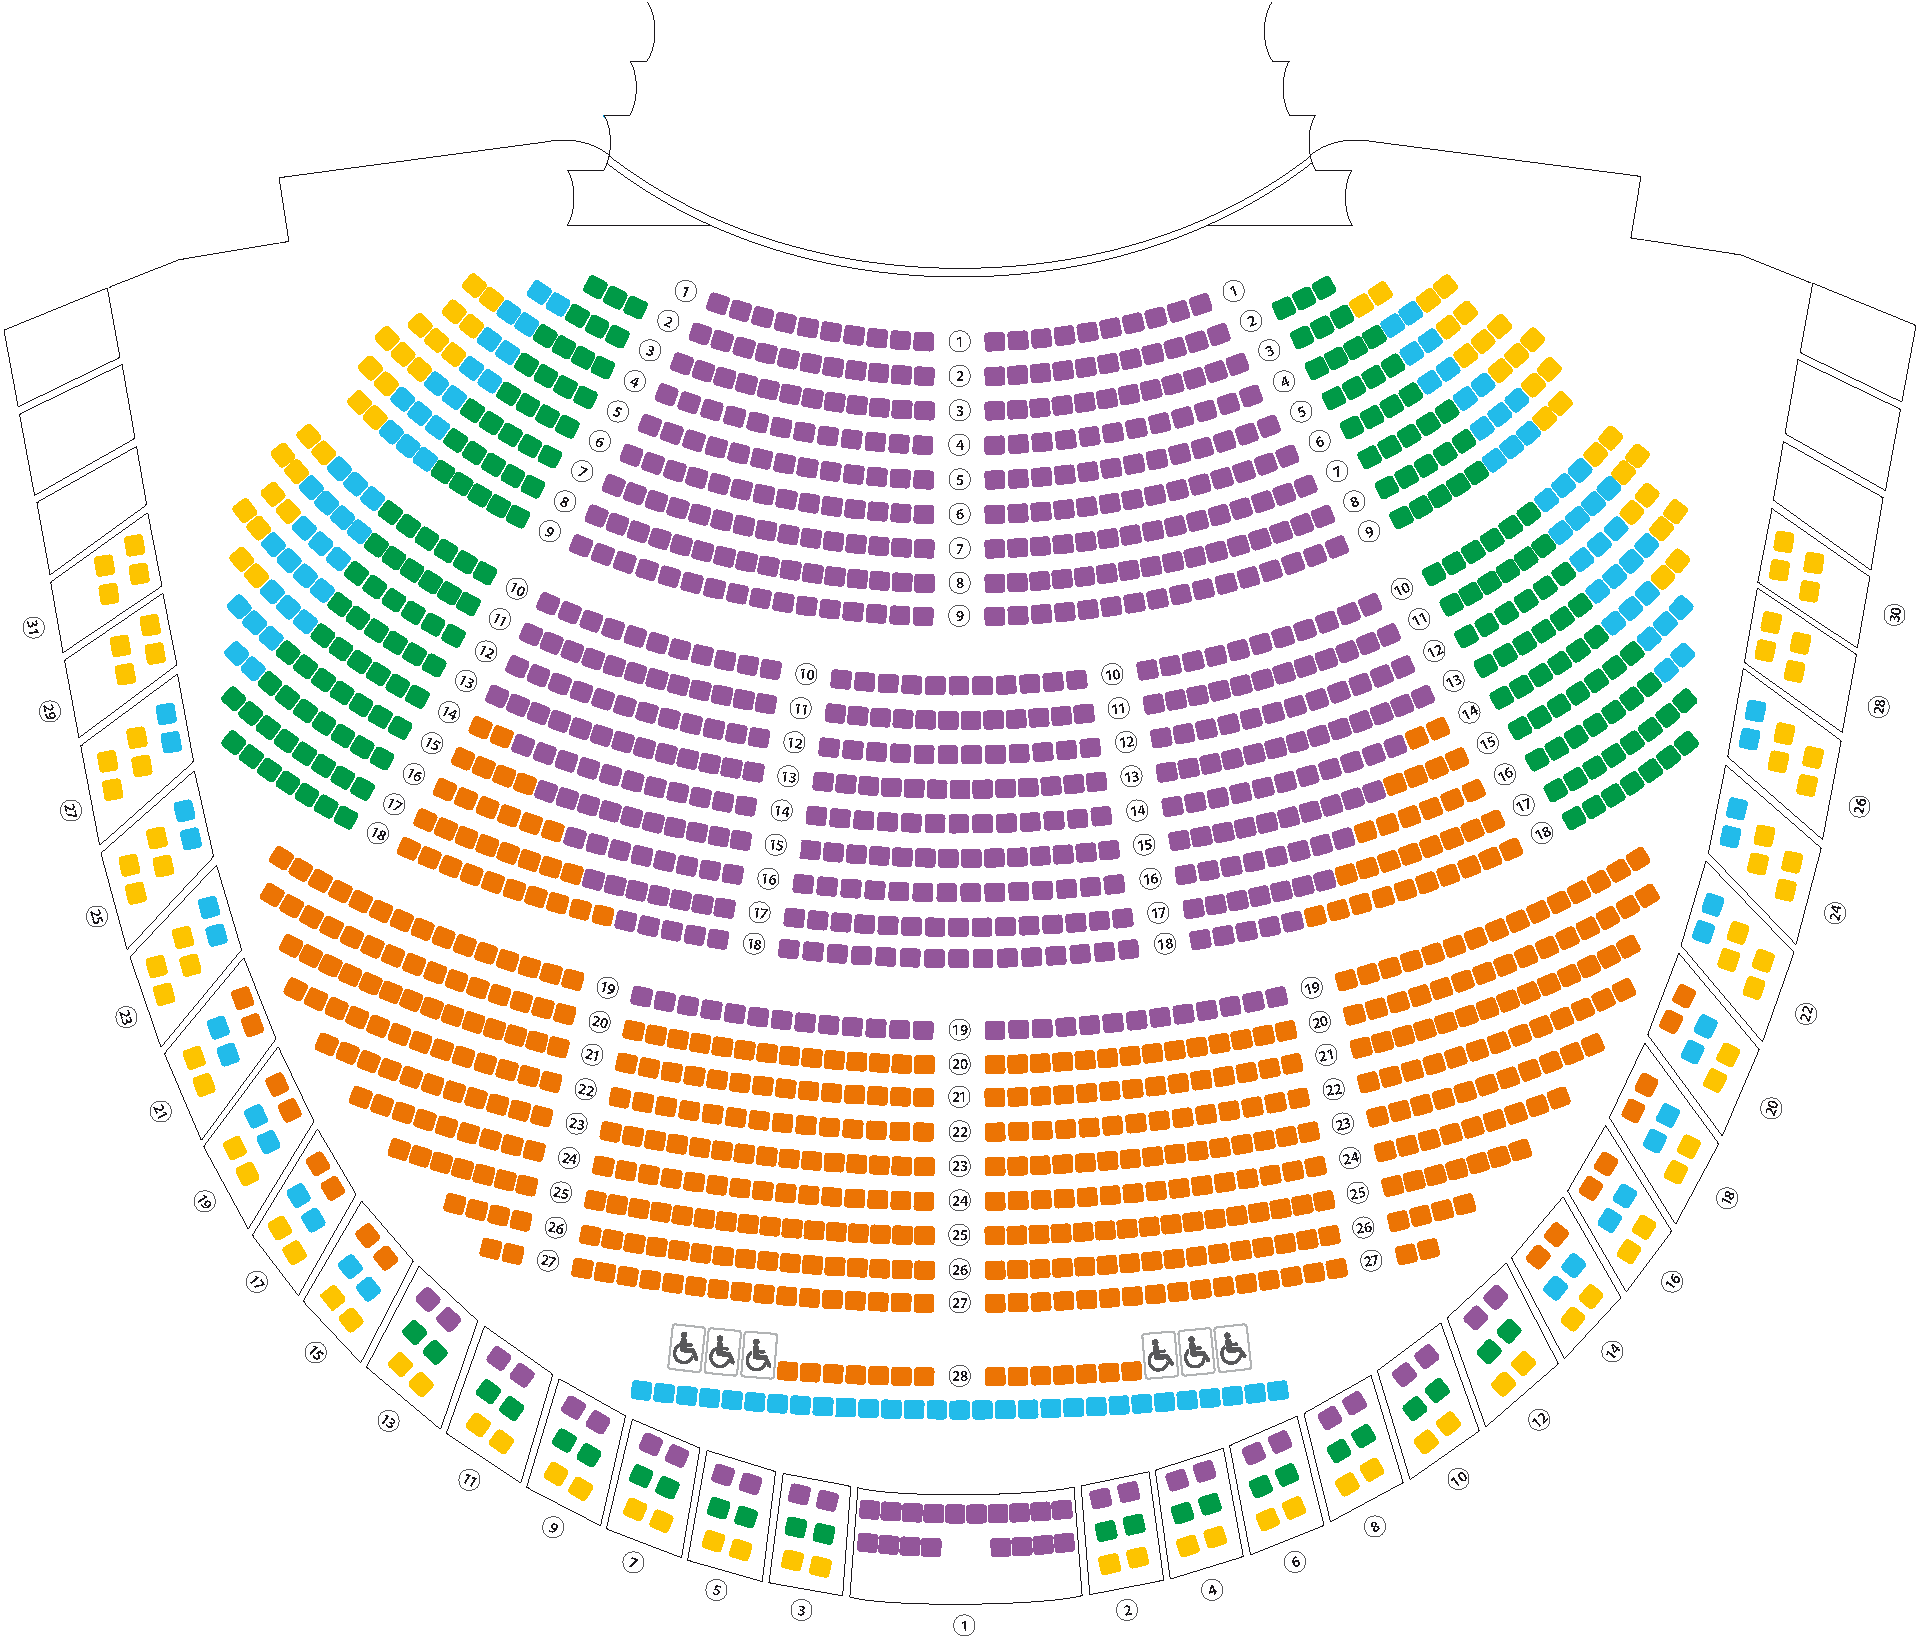 Floorplan with sectors for Opera and Ballet Season